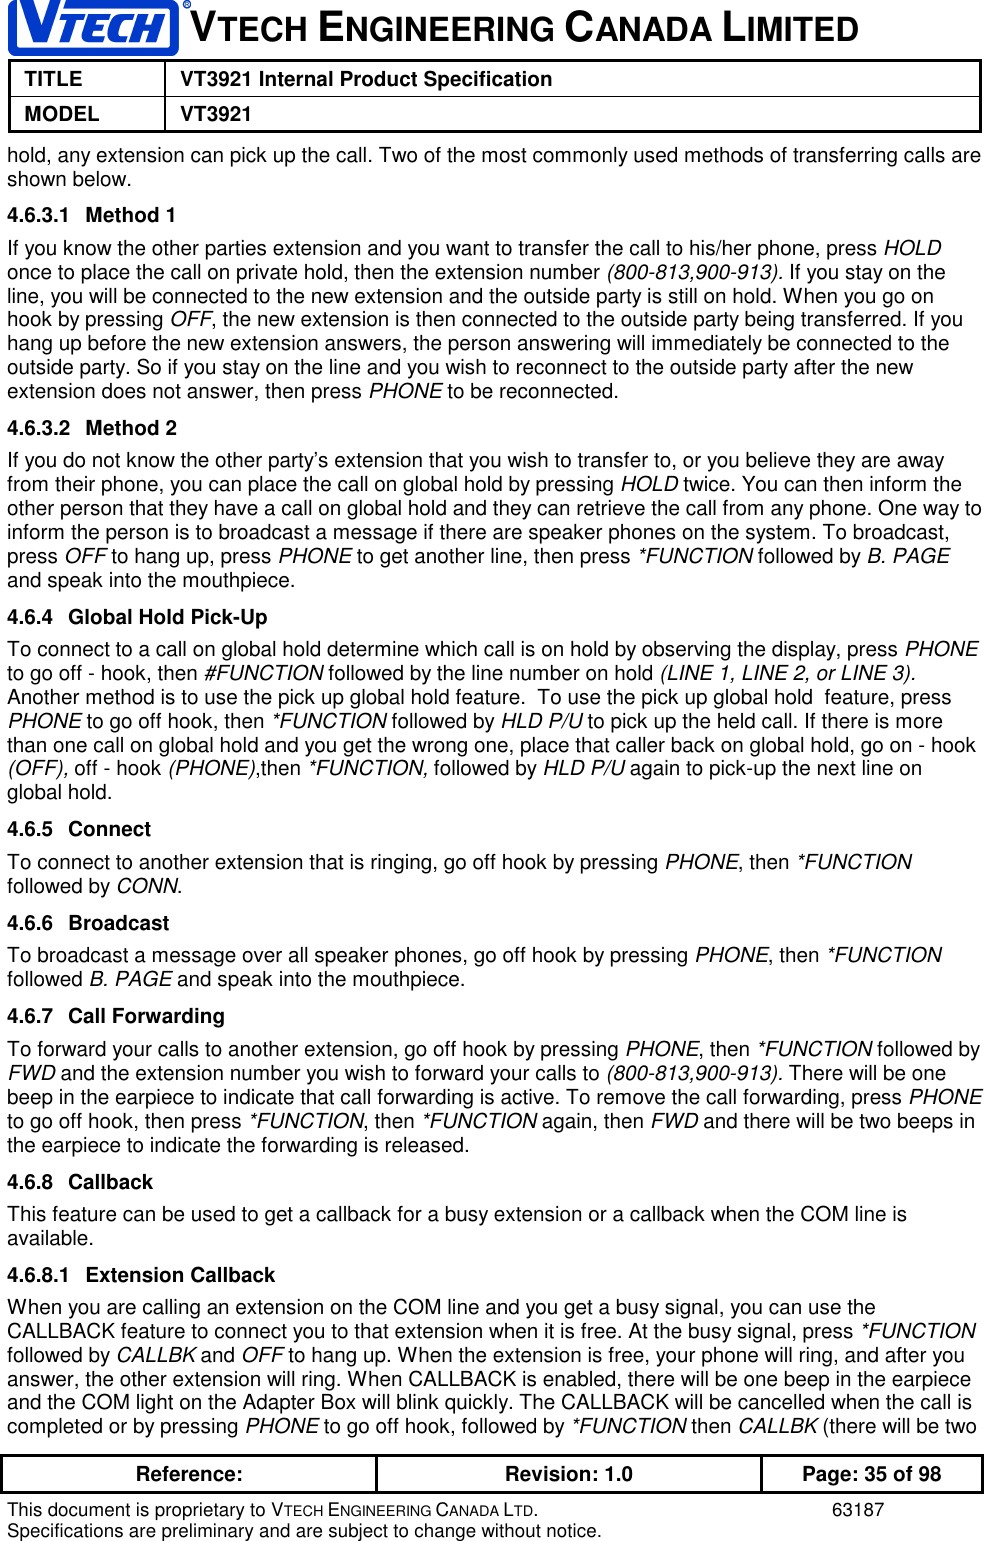 VTECH ENGINEERING CANADA LIMITEDTITLE VT3921 Internal Product SpecificationMODEL VT3921Reference: Revision: 1.0 Page: 35 of 98This document is proprietary to VTECH ENGINEERING CANADA LTD. 63187Specifications are preliminary and are subject to change without notice.hold, any extension can pick up the call. Two of the most commonly used methods of transferring calls areshown below.4.6.3.1 Method 1If you know the other parties extension and you want to transfer the call to his/her phone, press HOLDonce to place the call on private hold, then the extension number (800-813,900-913). If you stay on theline, you will be connected to the new extension and the outside party is still on hold. When you go onhook by pressing OFF, the new extension is then connected to the outside party being transferred. If youhang up before the new extension answers, the person answering will immediately be connected to theoutside party. So if you stay on the line and you wish to reconnect to the outside party after the newextension does not answer, then press PHONE to be reconnected.4.6.3.2 Method 2If you do not know the other party’s extension that you wish to transfer to, or you believe they are awayfrom their phone, you can place the call on global hold by pressing HOLD twice. You can then inform theother person that they have a call on global hold and they can retrieve the call from any phone. One way toinform the person is to broadcast a message if there are speaker phones on the system. To broadcast,press OFF to hang up, press PHONE to get another line, then press *FUNCTION followed by B. PAGEand speak into the mouthpiece.4.6.4  Global Hold Pick-UpTo connect to a call on global hold determine which call is on hold by observing the display, press PHONEto go off - hook, then #FUNCTION followed by the line number on hold (LINE 1, LINE 2, or LINE 3).Another method is to use the pick up global hold feature.  To use the pick up global hold  feature, pressPHONE to go off hook, then *FUNCTION followed by HLD P/U to pick up the held call. If there is morethan one call on global hold and you get the wrong one, place that caller back on global hold, go on - hook(OFF), off - hook (PHONE),then *FUNCTION, followed by HLD P/U again to pick-up the next line onglobal hold.4.6.5 ConnectTo connect to another extension that is ringing, go off hook by pressing PHONE, then *FUNCTIONfollowed by CONN.4.6.6 BroadcastTo broadcast a message over all speaker phones, go off hook by pressing PHONE, then *FUNCTIONfollowed B. PAGE and speak into the mouthpiece.4.6.7 Call ForwardingTo forward your calls to another extension, go off hook by pressing PHONE, then *FUNCTION followed byFWD and the extension number you wish to forward your calls to (800-813,900-913). There will be onebeep in the earpiece to indicate that call forwarding is active. To remove the call forwarding, press PHONEto go off hook, then press *FUNCTION, then *FUNCTION again, then FWD and there will be two beeps inthe earpiece to indicate the forwarding is released.4.6.8 CallbackThis feature can be used to get a callback for a busy extension or a callback when the COM line isavailable.4.6.8.1 Extension CallbackWhen you are calling an extension on the COM line and you get a busy signal, you can use theCALLBACK feature to connect you to that extension when it is free. At the busy signal, press *FUNCTIONfollowed by CALLBK and OFF to hang up. When the extension is free, your phone will ring, and after youanswer, the other extension will ring. When CALLBACK is enabled, there will be one beep in the earpieceand the COM light on the Adapter Box will blink quickly. The CALLBACK will be cancelled when the call iscompleted or by pressing PHONE to go off hook, followed by *FUNCTION then CALLBK (there will be two